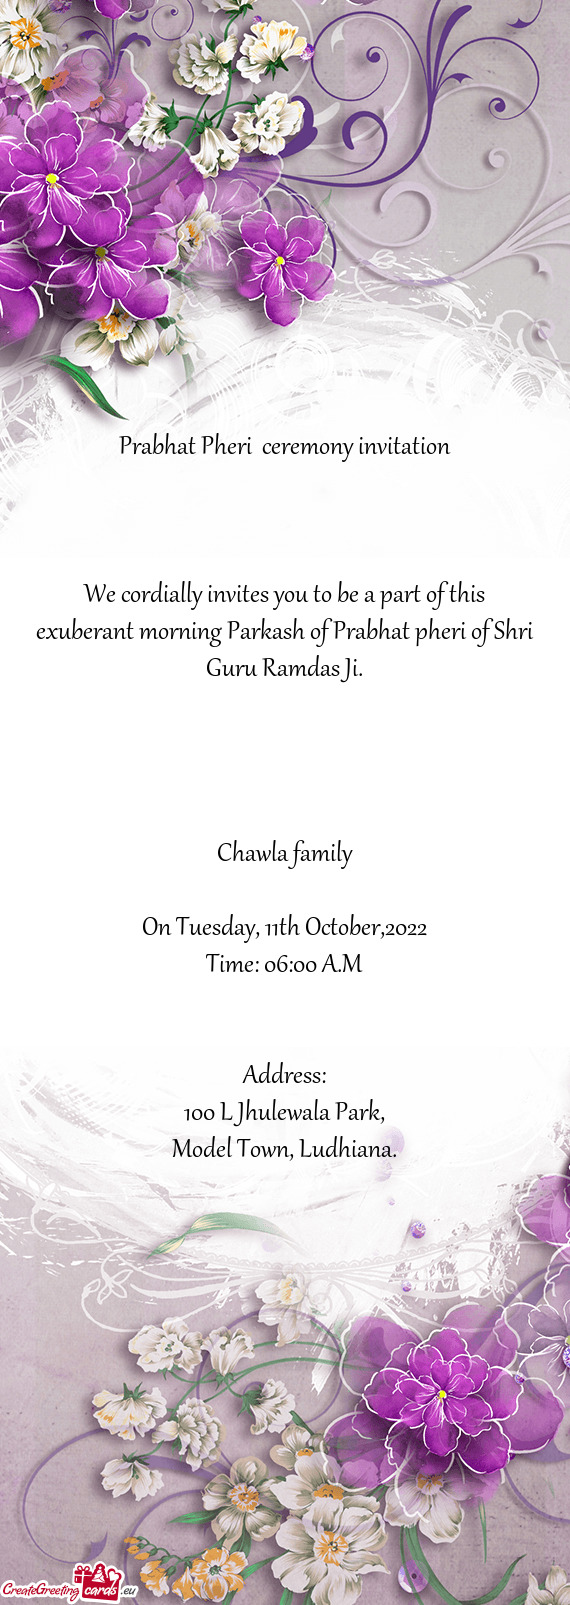 We cordially invites you to be a part of this exuberant morning Parkash of Prabhat pheri of Shri Gur